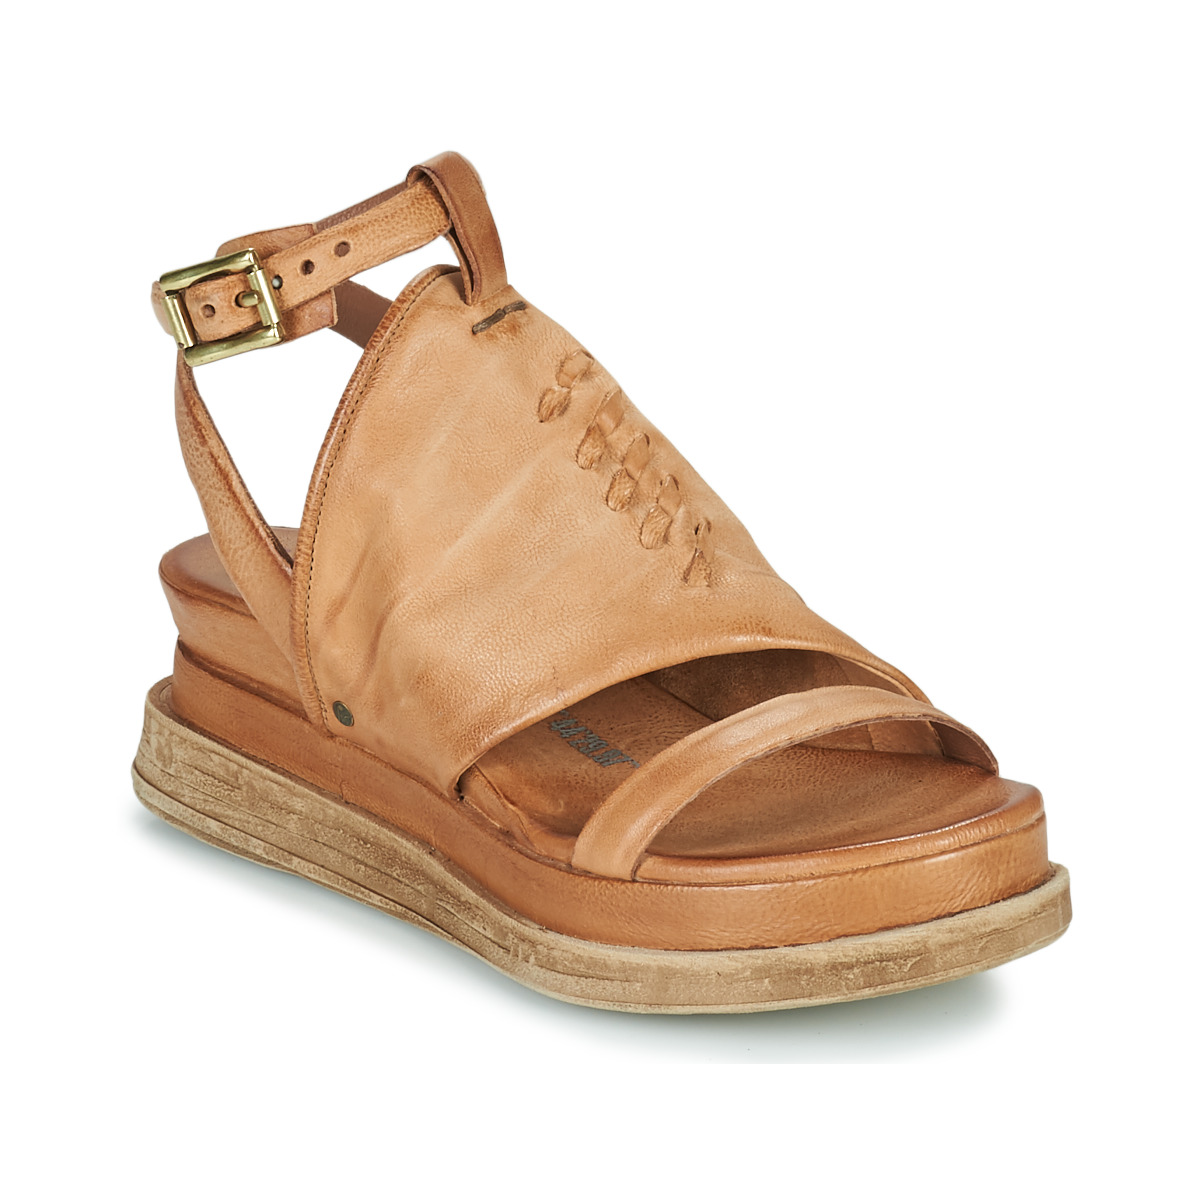 Shoes Women Sandals Airstep / A.S.98 LAGOS BRIDE Camel